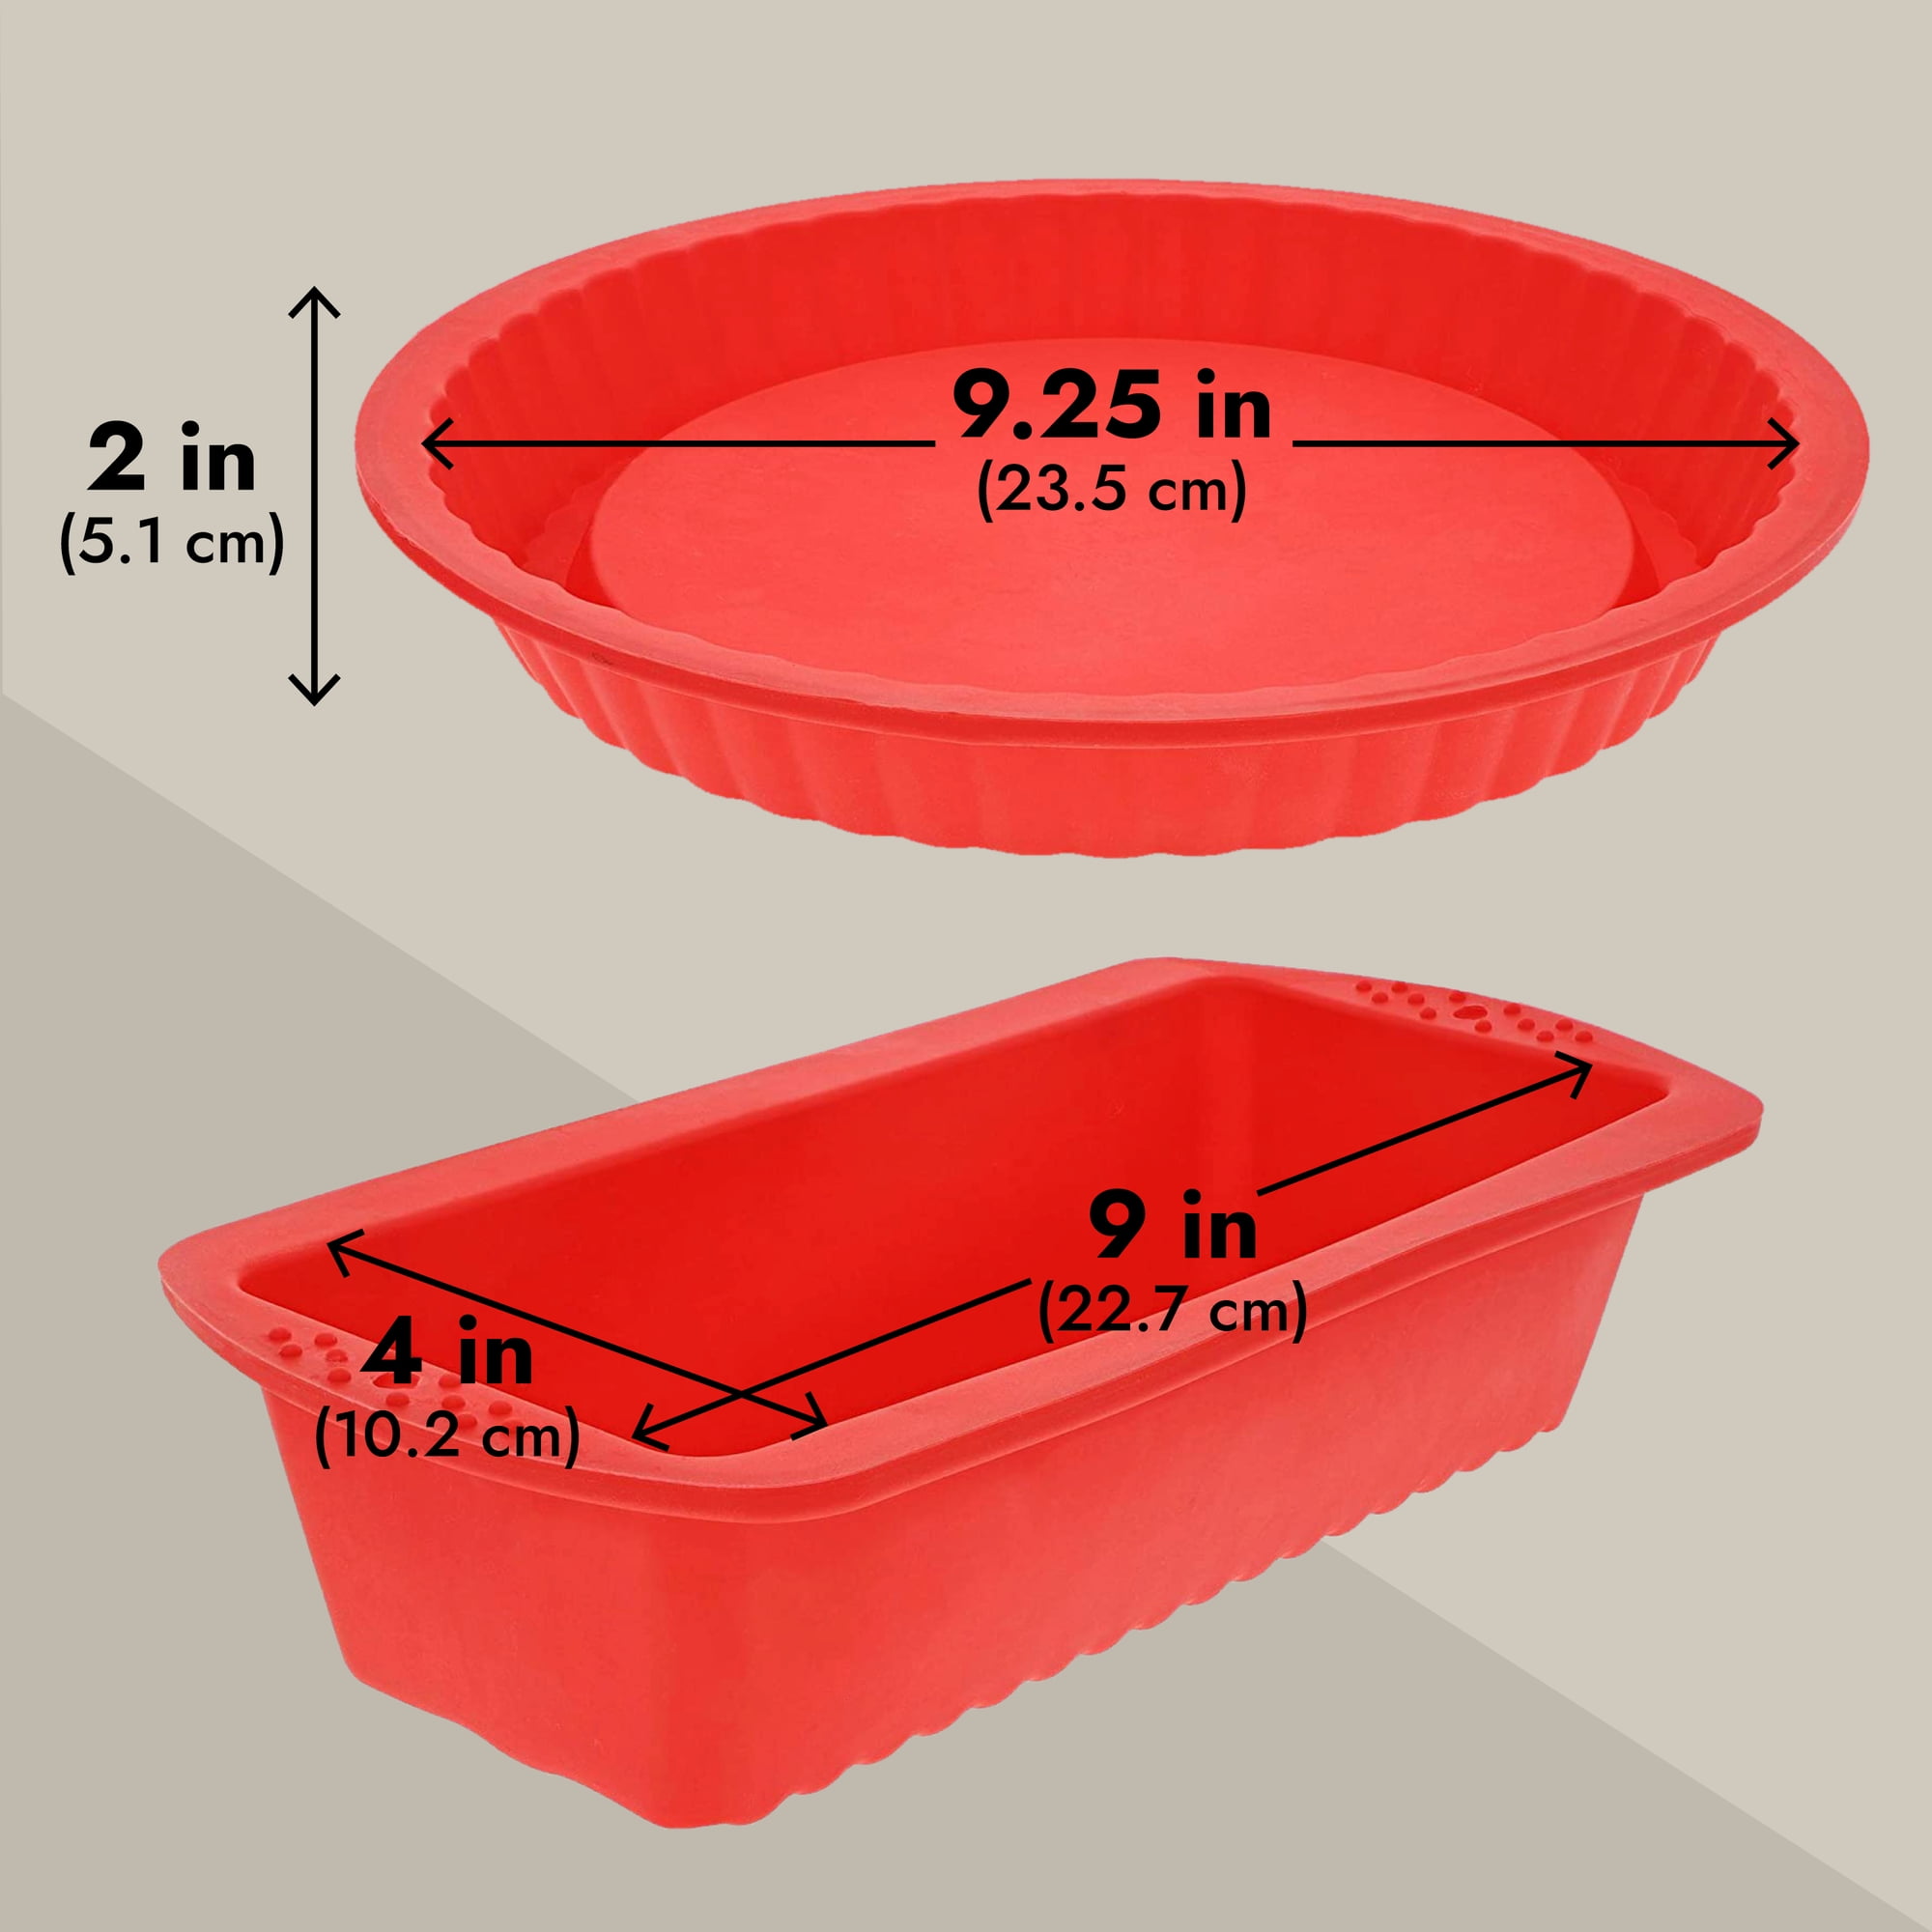 New/unused Prepology Red 8-piece Silicone Tortilla Pan Tostada 